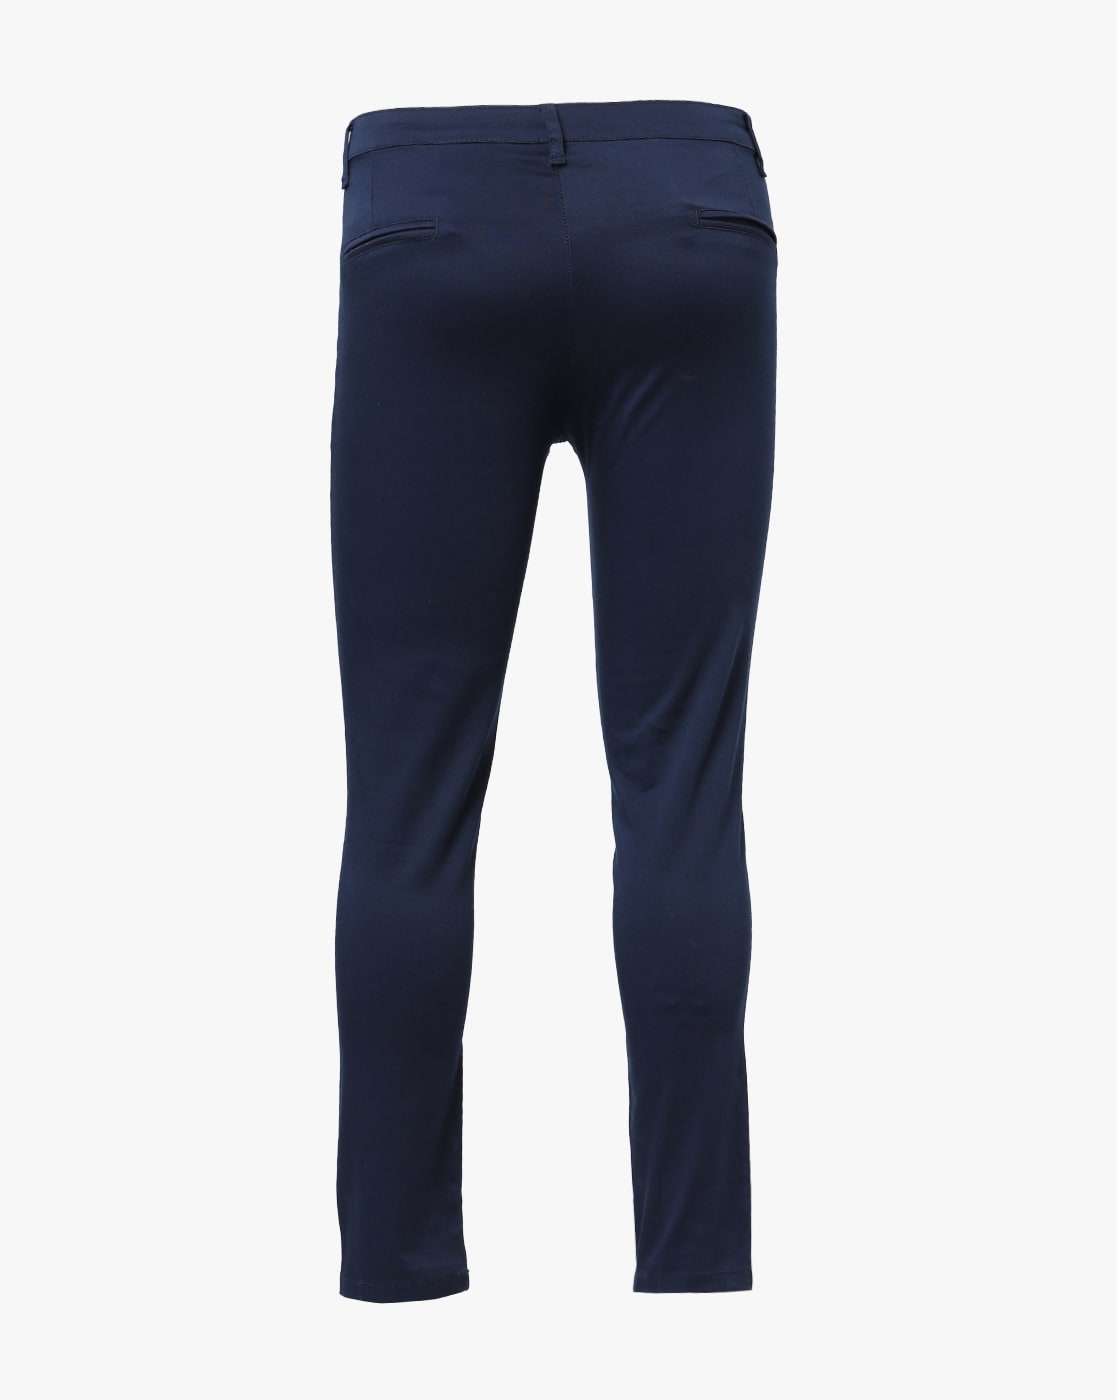 Shine N Show Skinny Fit Women Blue Trousers - Buy Shine N Show Skinny Fit  Women Blue Trousers Online at Best Prices in India | Flipkart.com